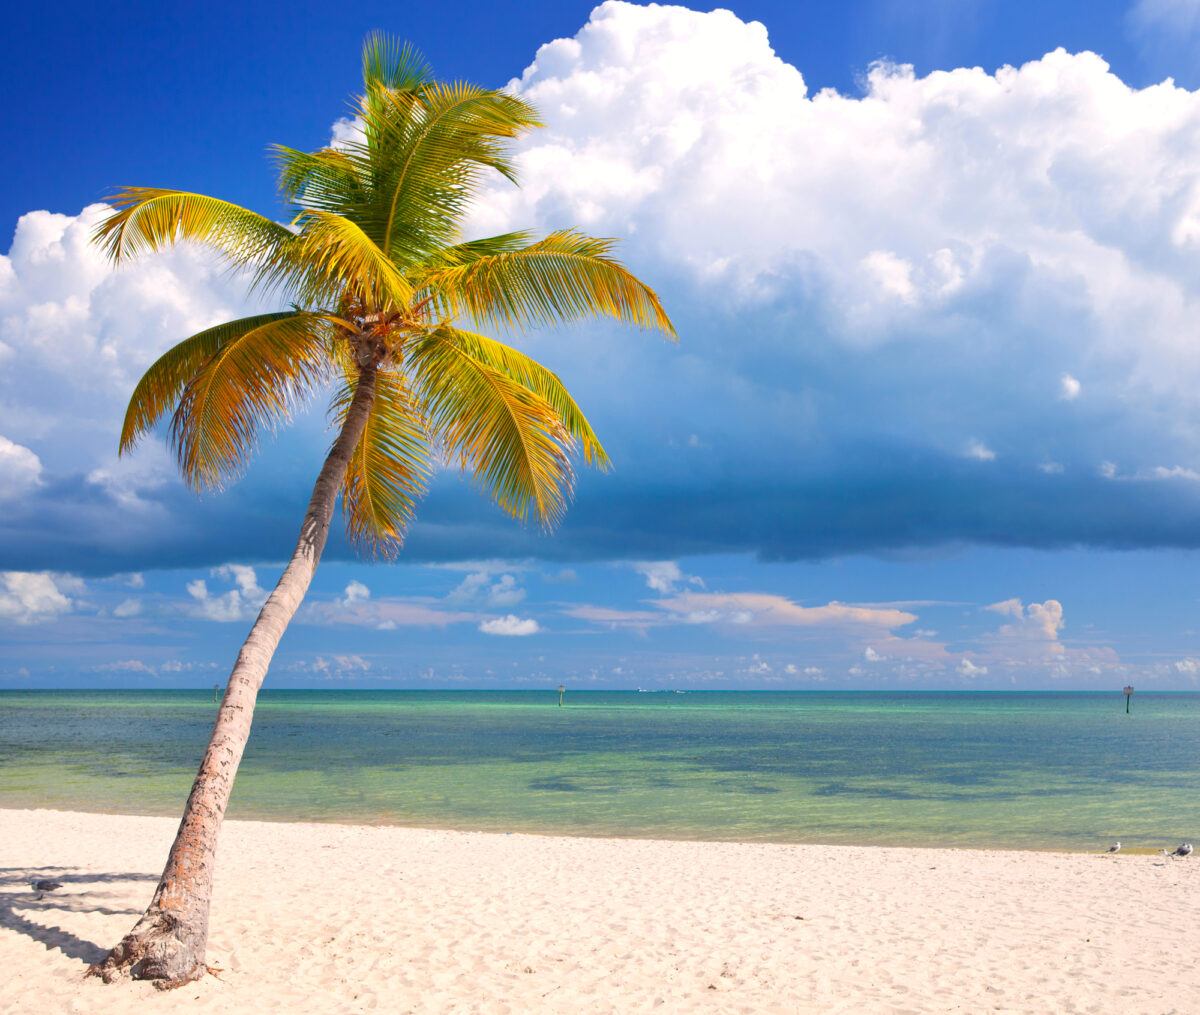 All great Florida family vacations include beach time, like at this sandy spot in Key West